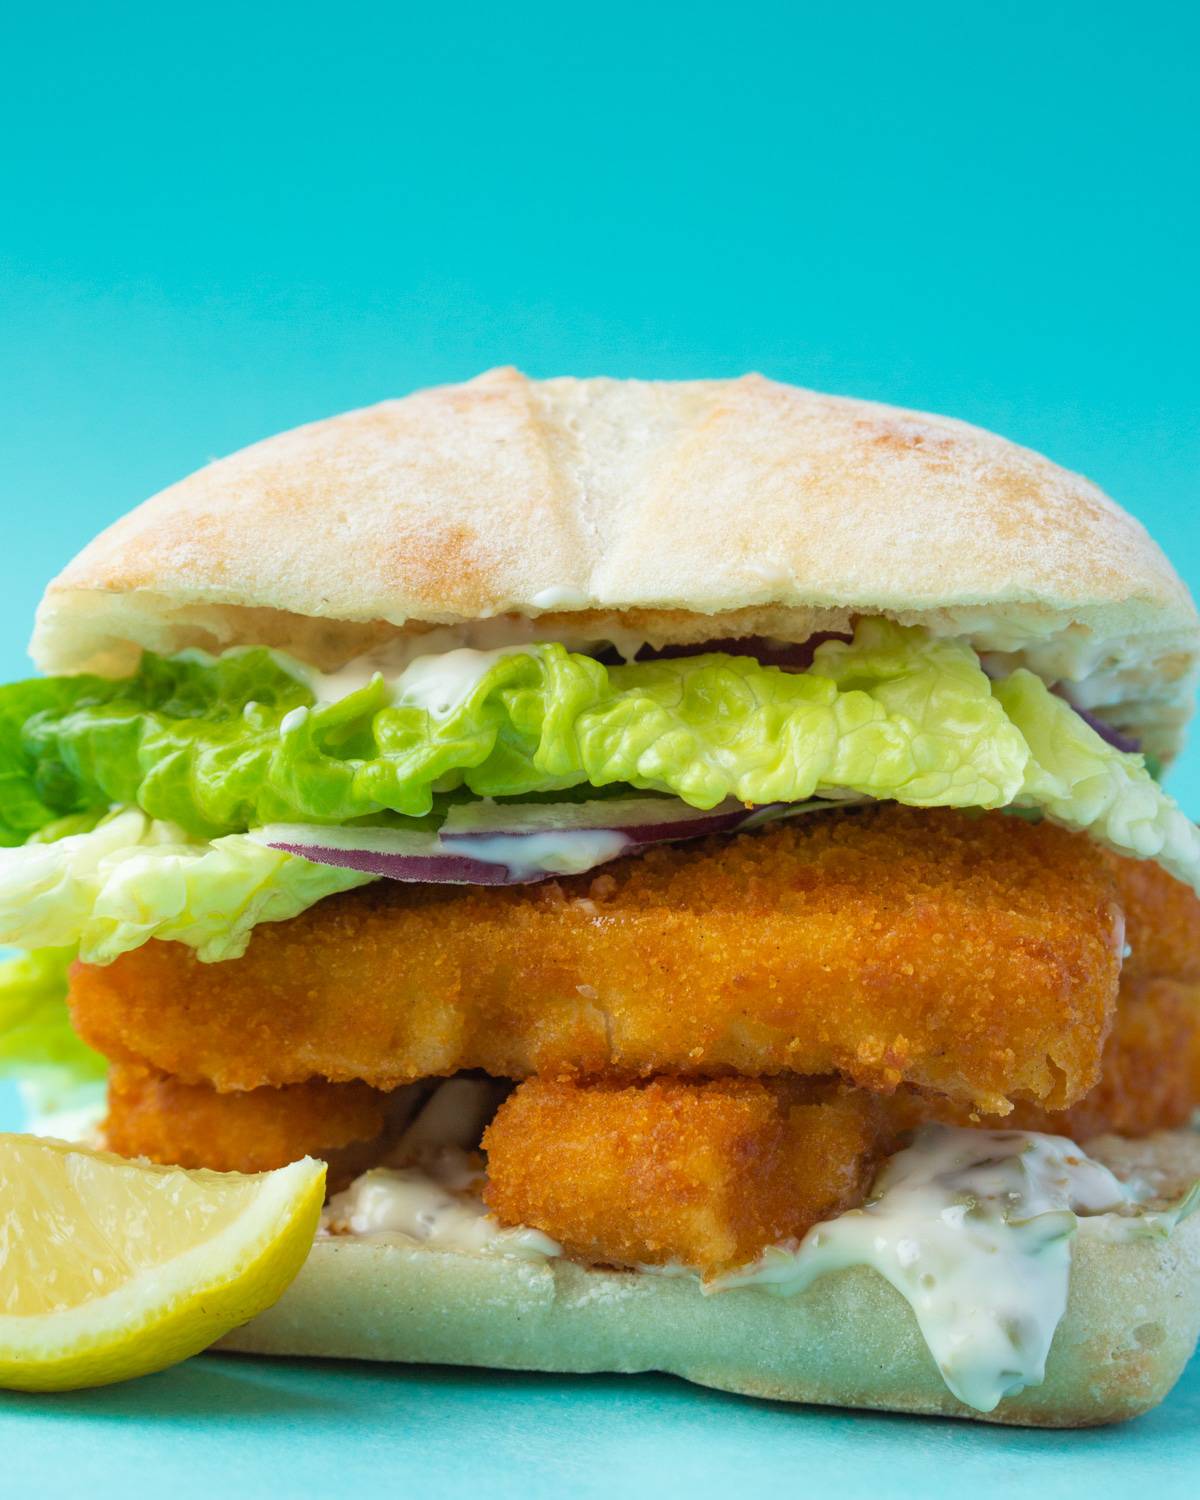 Side view of fish finger sandwich with lettuce, red onion, mayonnaise and a wedge of lemon with blue background.